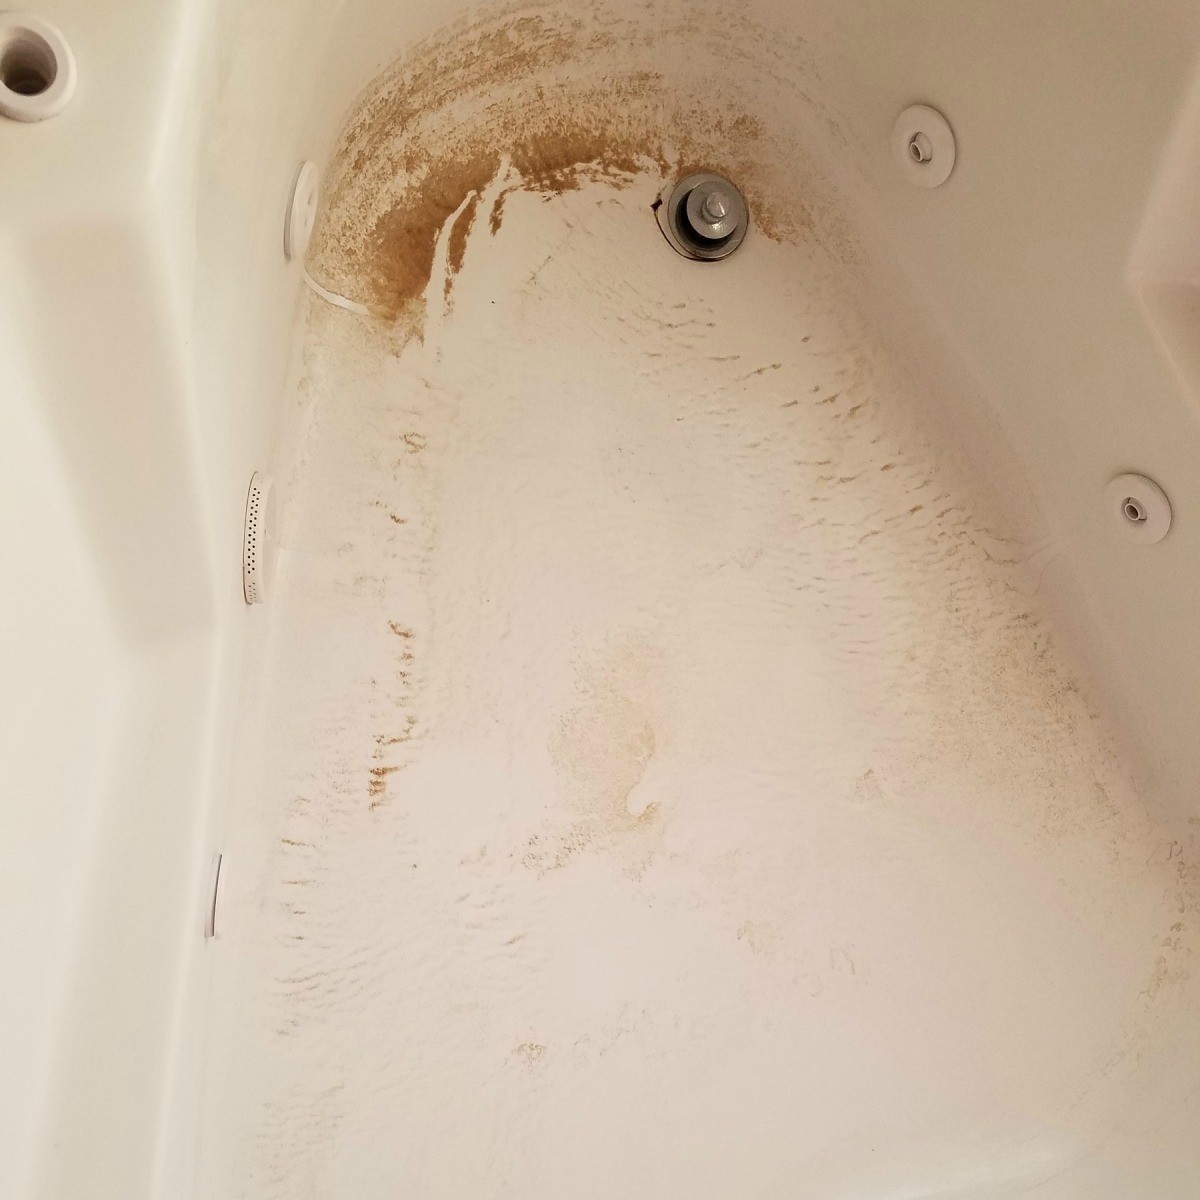 Jacuzzi Bathtub Has Sand In Water Pipes, How To Clean Jacuzzi Bathtub Jets